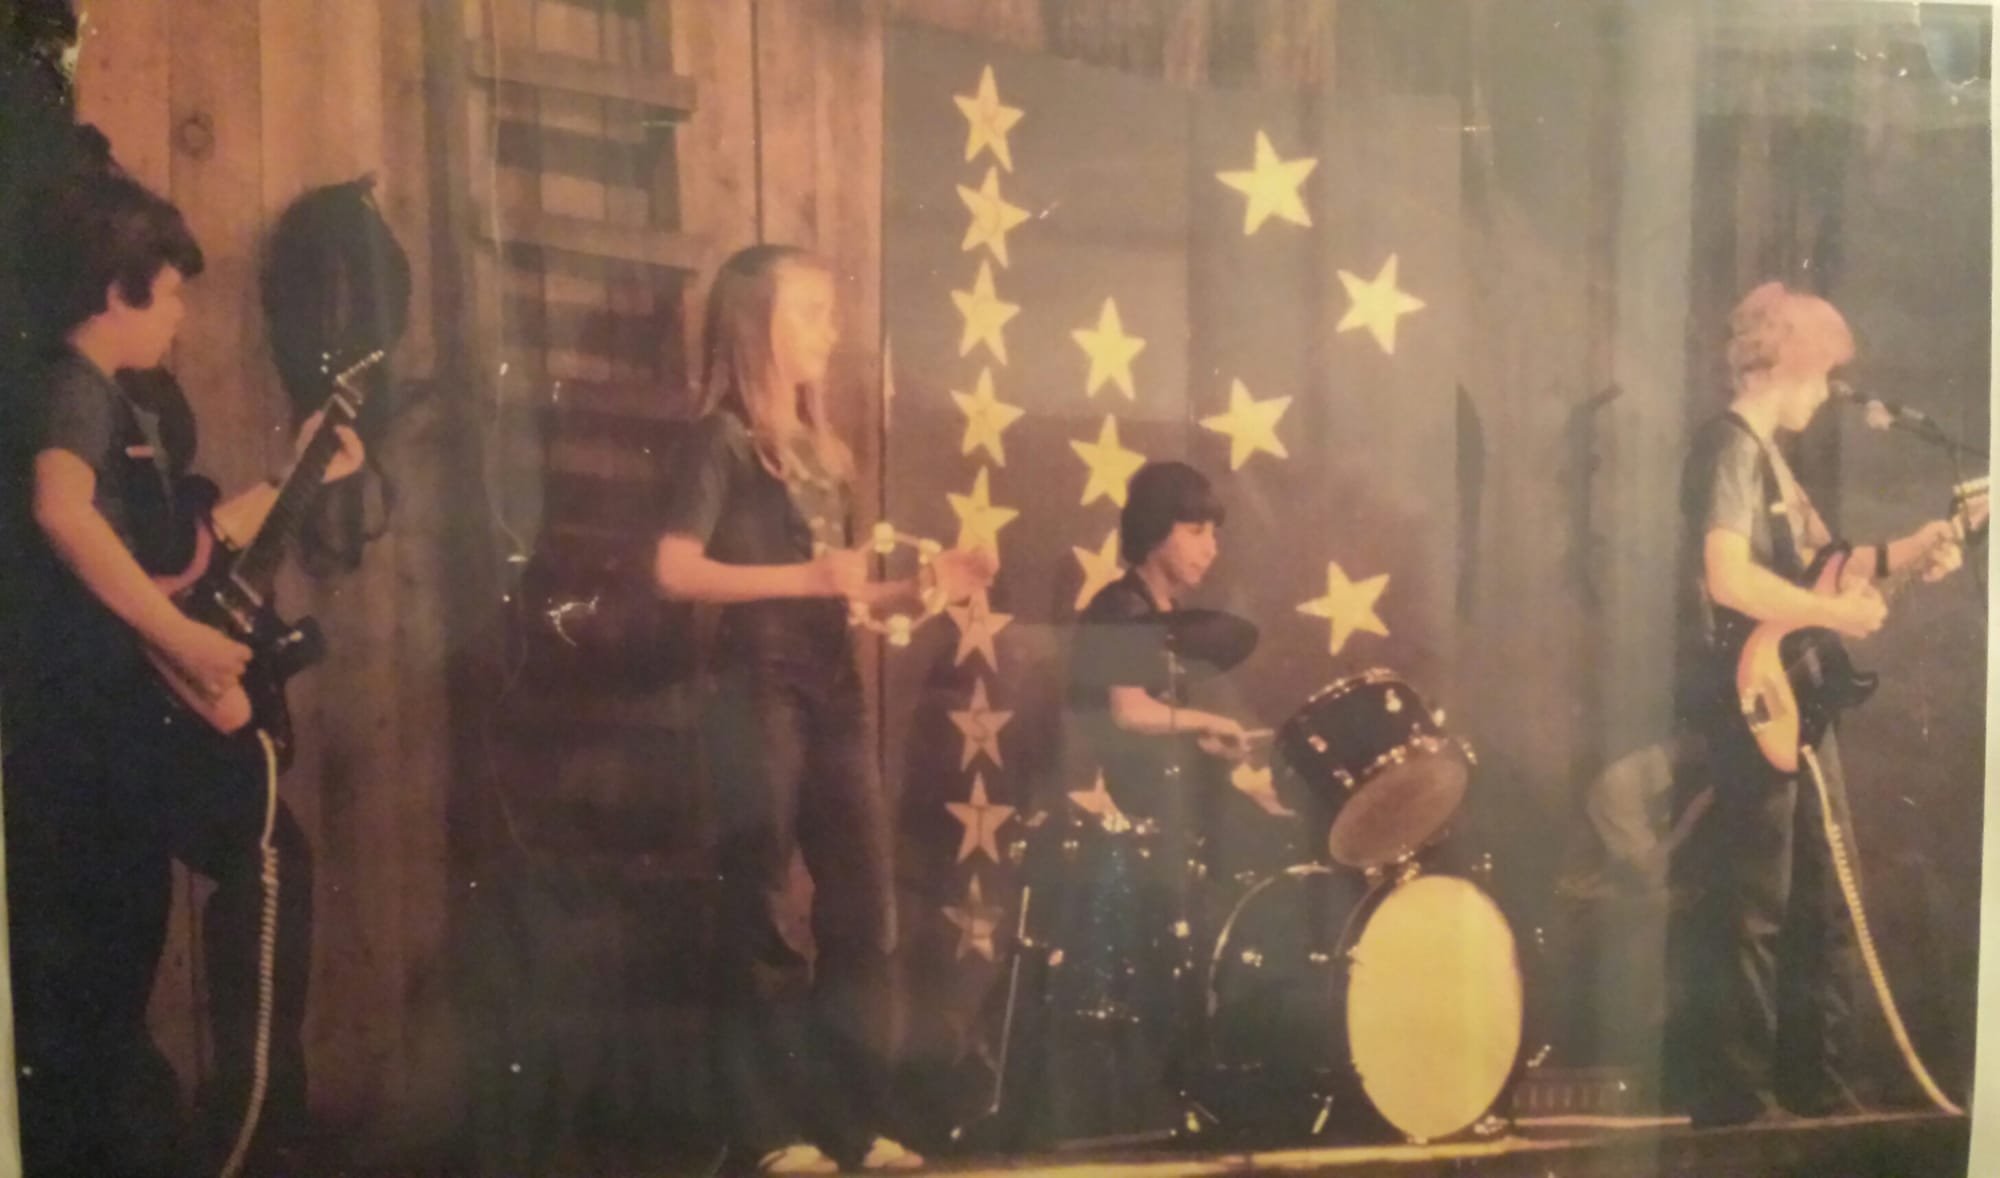 my First Band "Fire & Ice" - at our first show, Renfro Valley Barn.